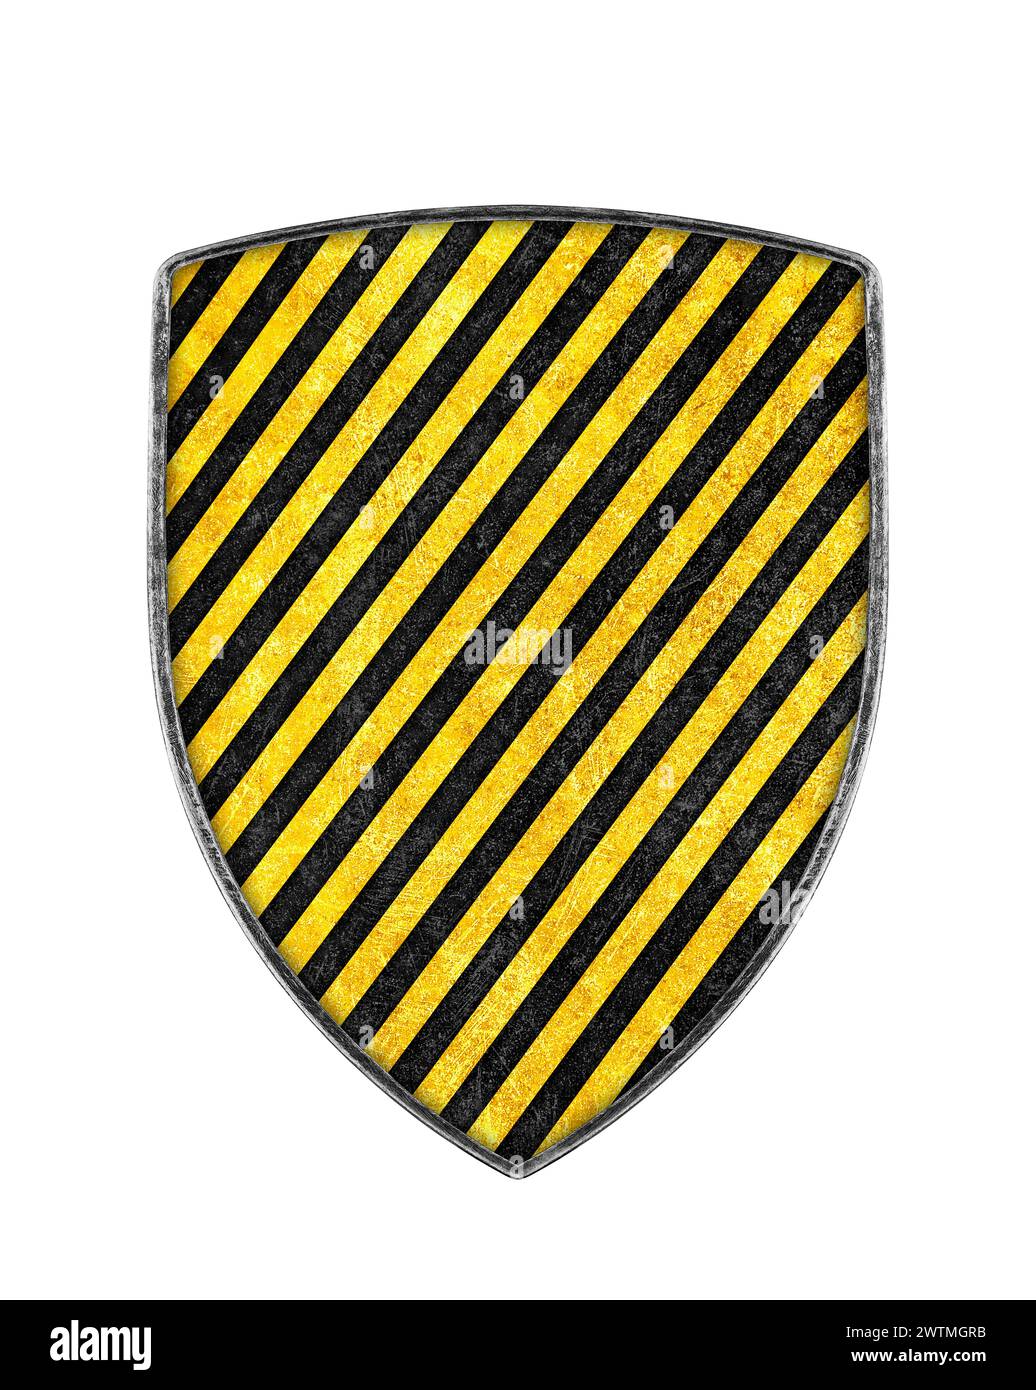 Old metal black and yellow striped shield isolated on white background Stock Photo